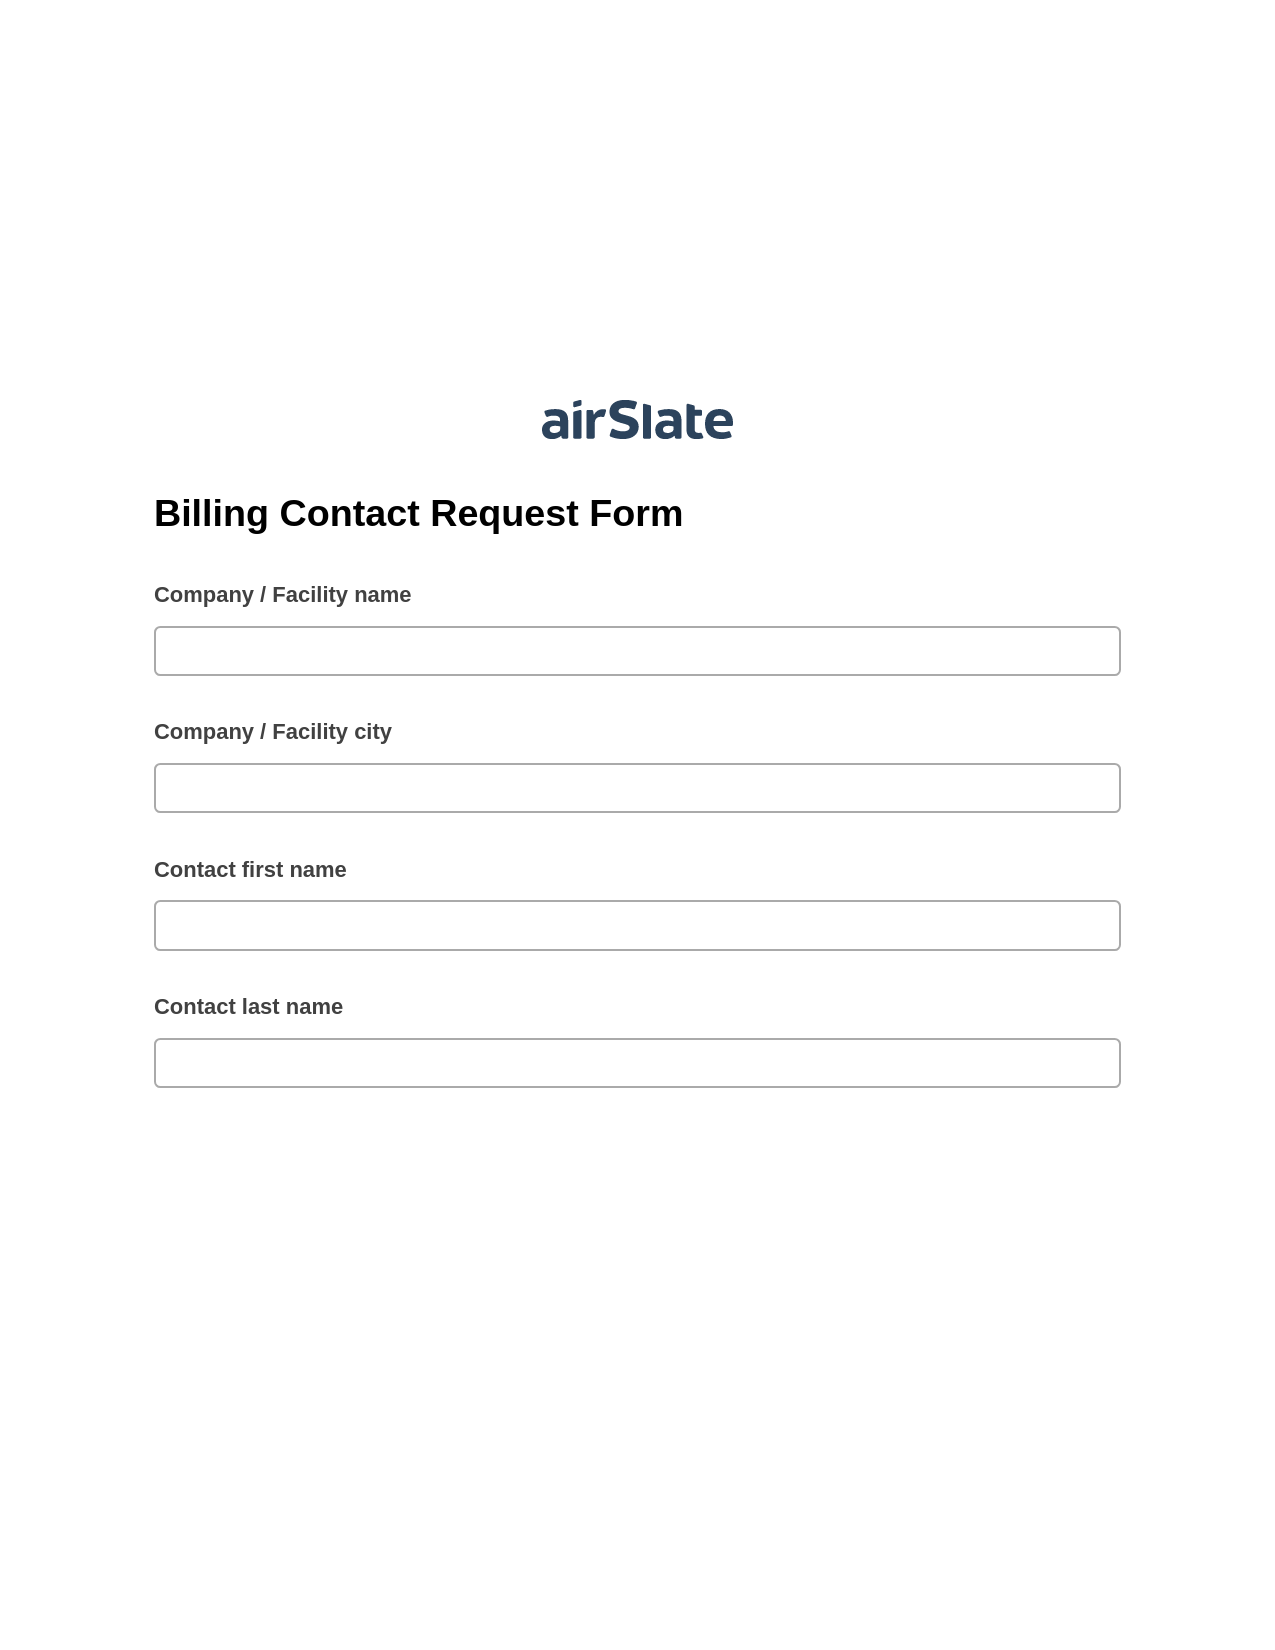 Multirole Billing Contact Request Form Pre-fill from Salesforce Record Bot, Document Hide Bot, Export to Smartsheet